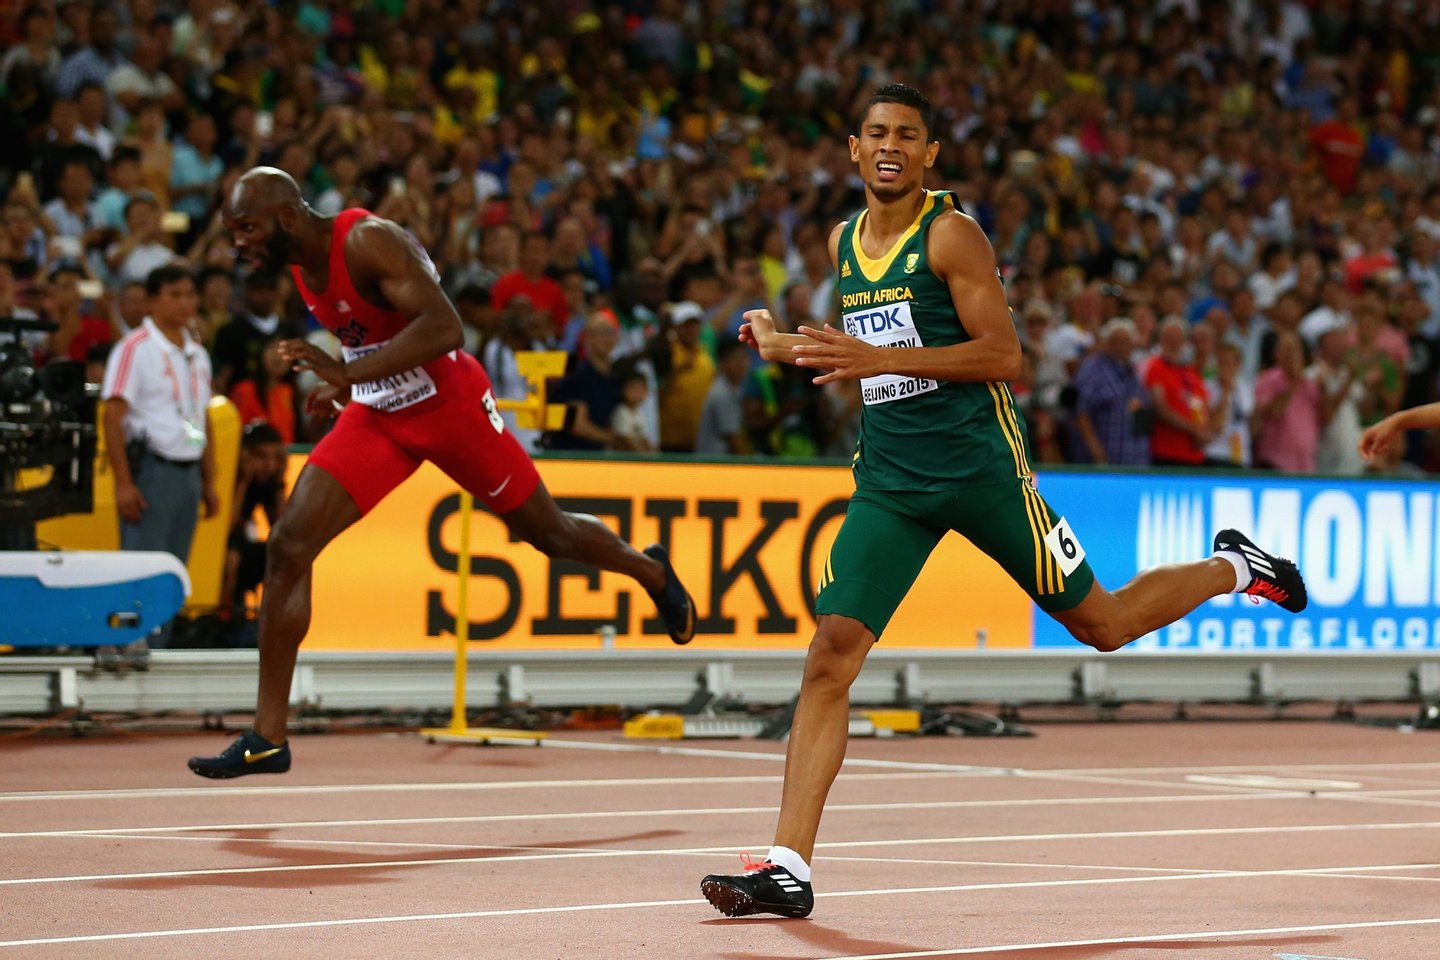 BEIJING, CHINA - AUGUST 26: Wayde Van Niekerk of South Africa (R) crosses the finish line to win gold ahead of Lashawn Merritt of the United States (L) in the Men's 400 metres final during day five of the 15th IAAF World Athletics Championships Beijing 2015 at Beijing National Stadium on August 26, 2015 in Beijing, China. (Photo by Cameron Spencer/Getty Images)